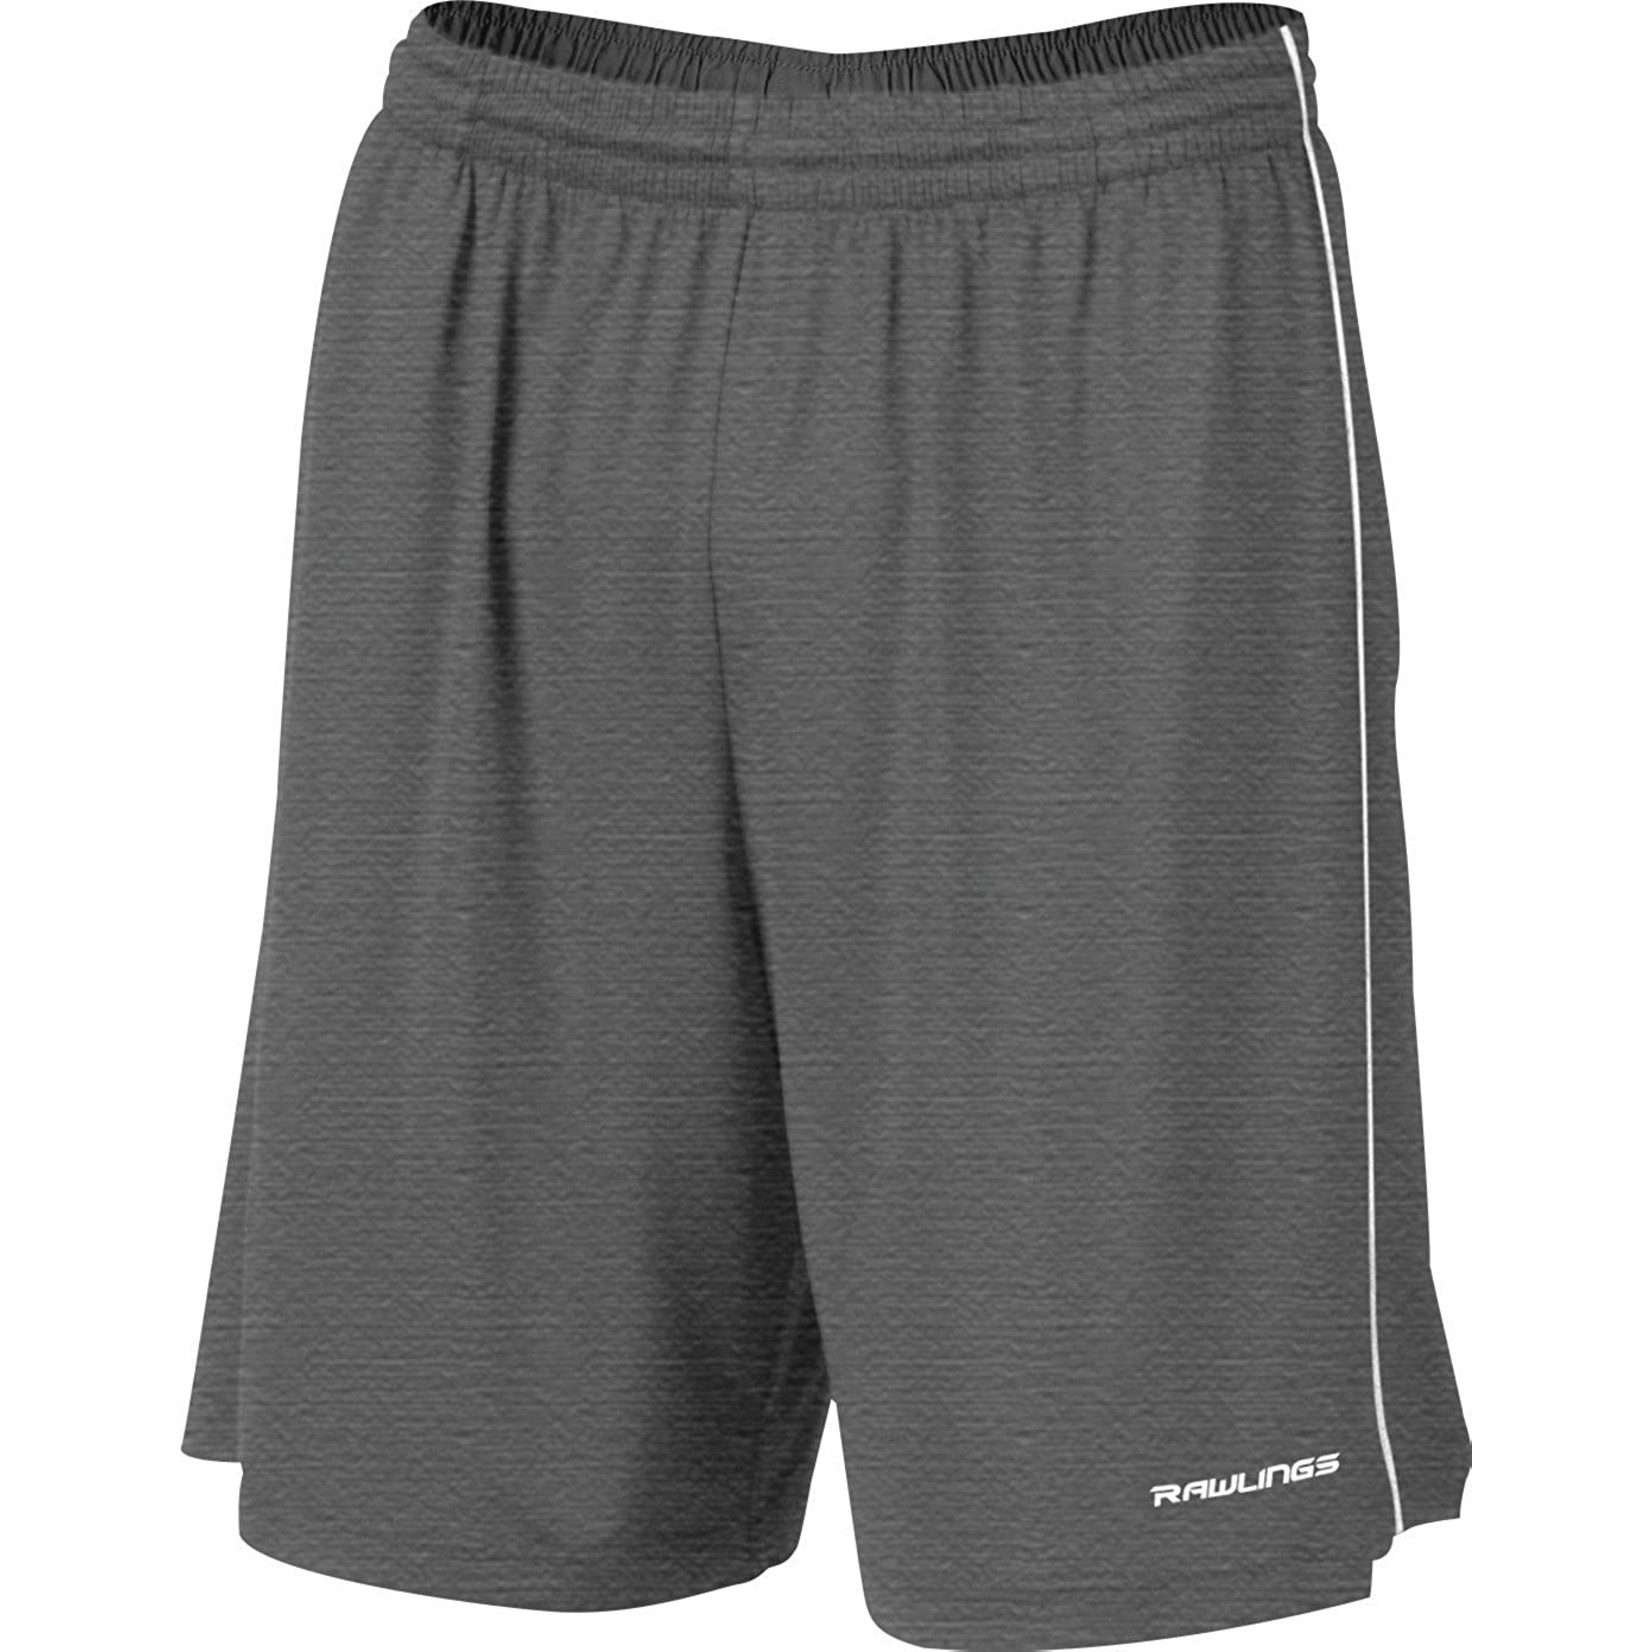 Rawlings Adult Relaxed Fit Shorts